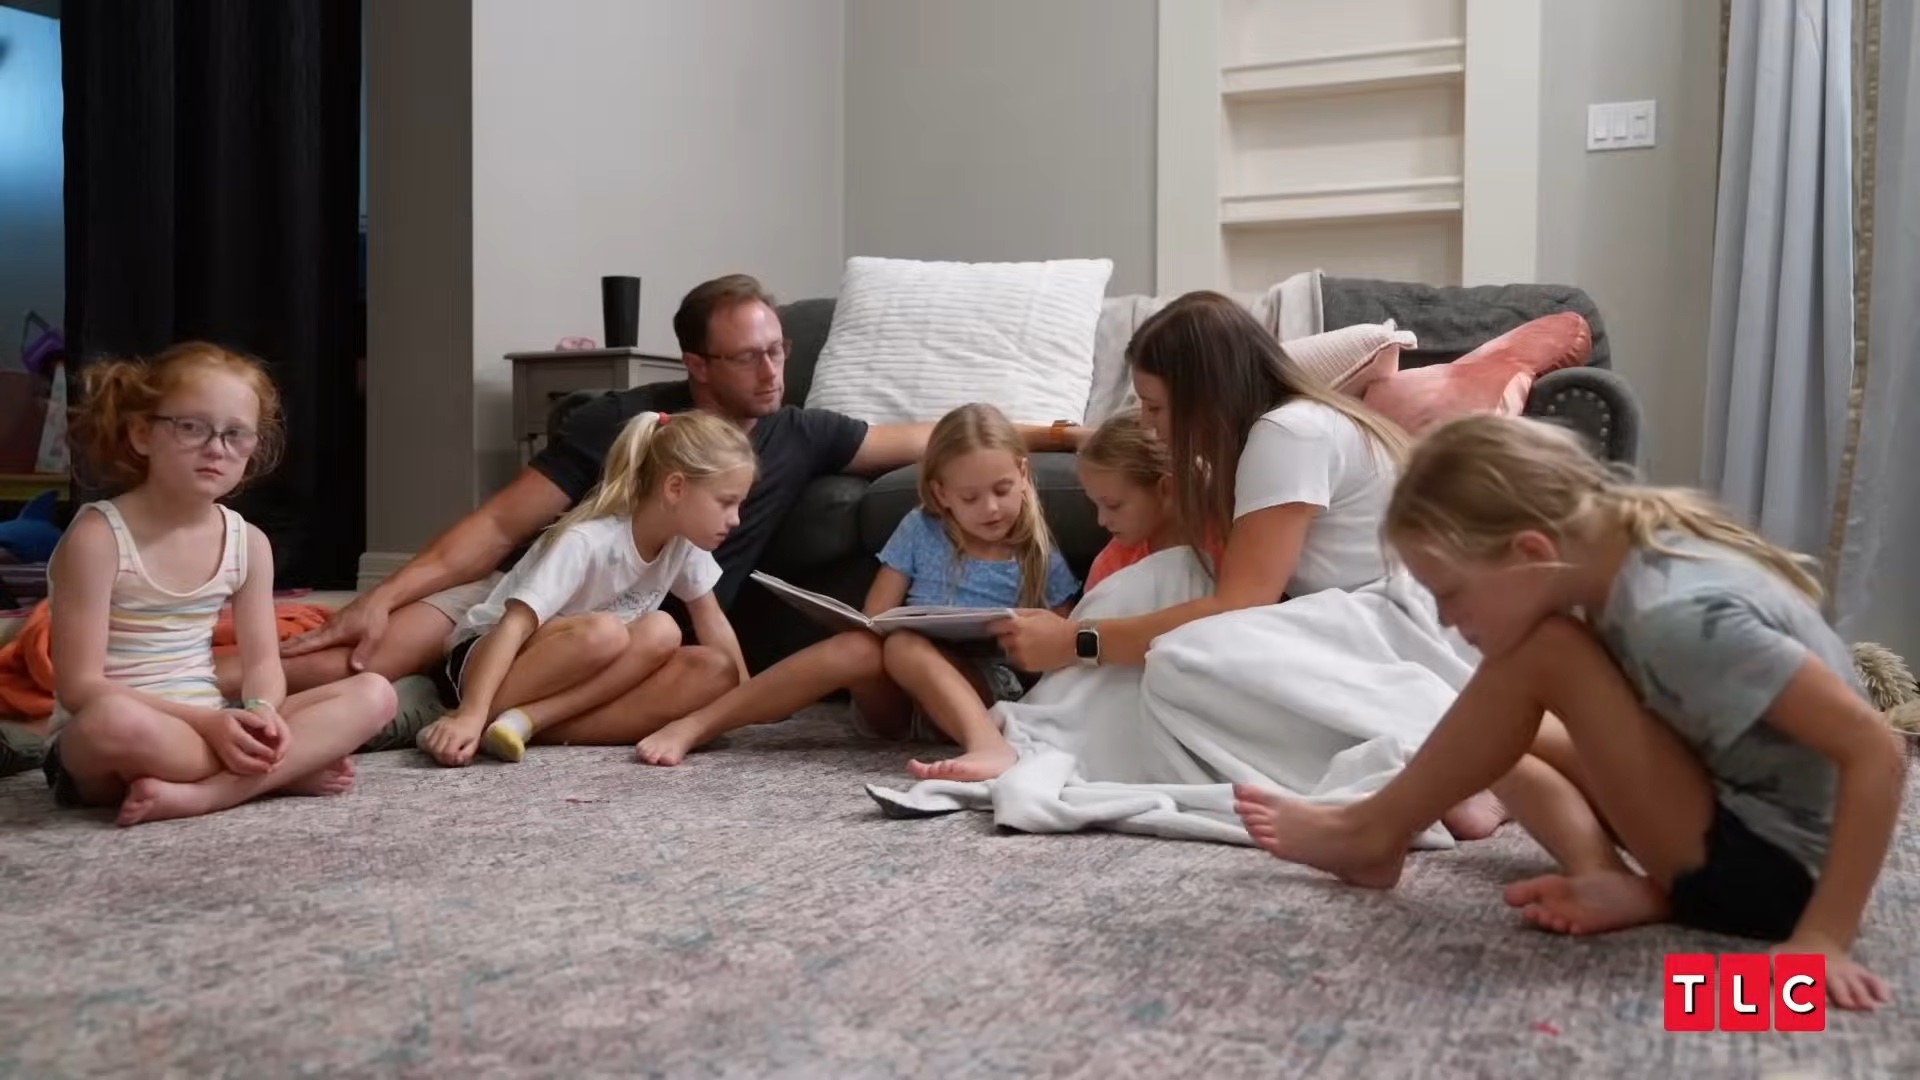 OutDaughtered Season 10- Premiere Date, Cast, Trailer